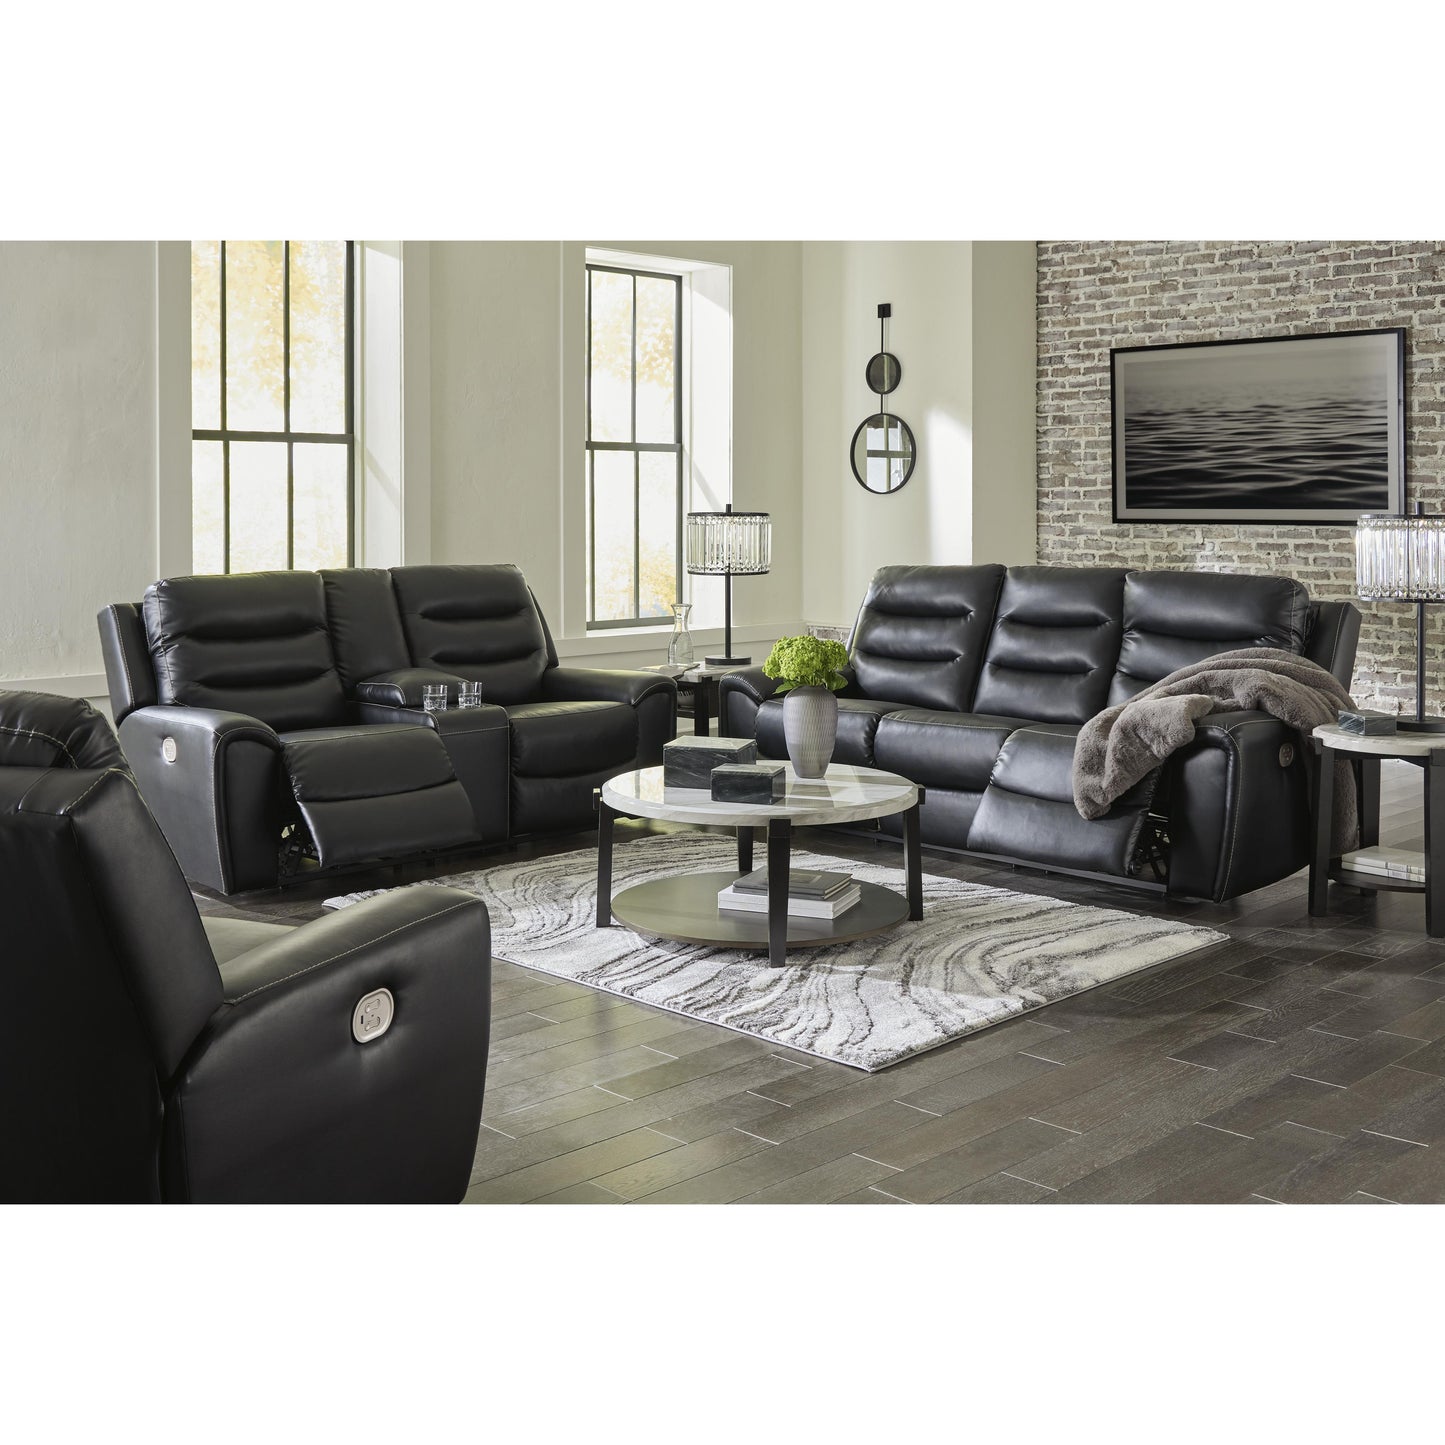 Signature Design by Ashley Warlin Power Reclining Leather Look Sofa 6110515 IMAGE 12